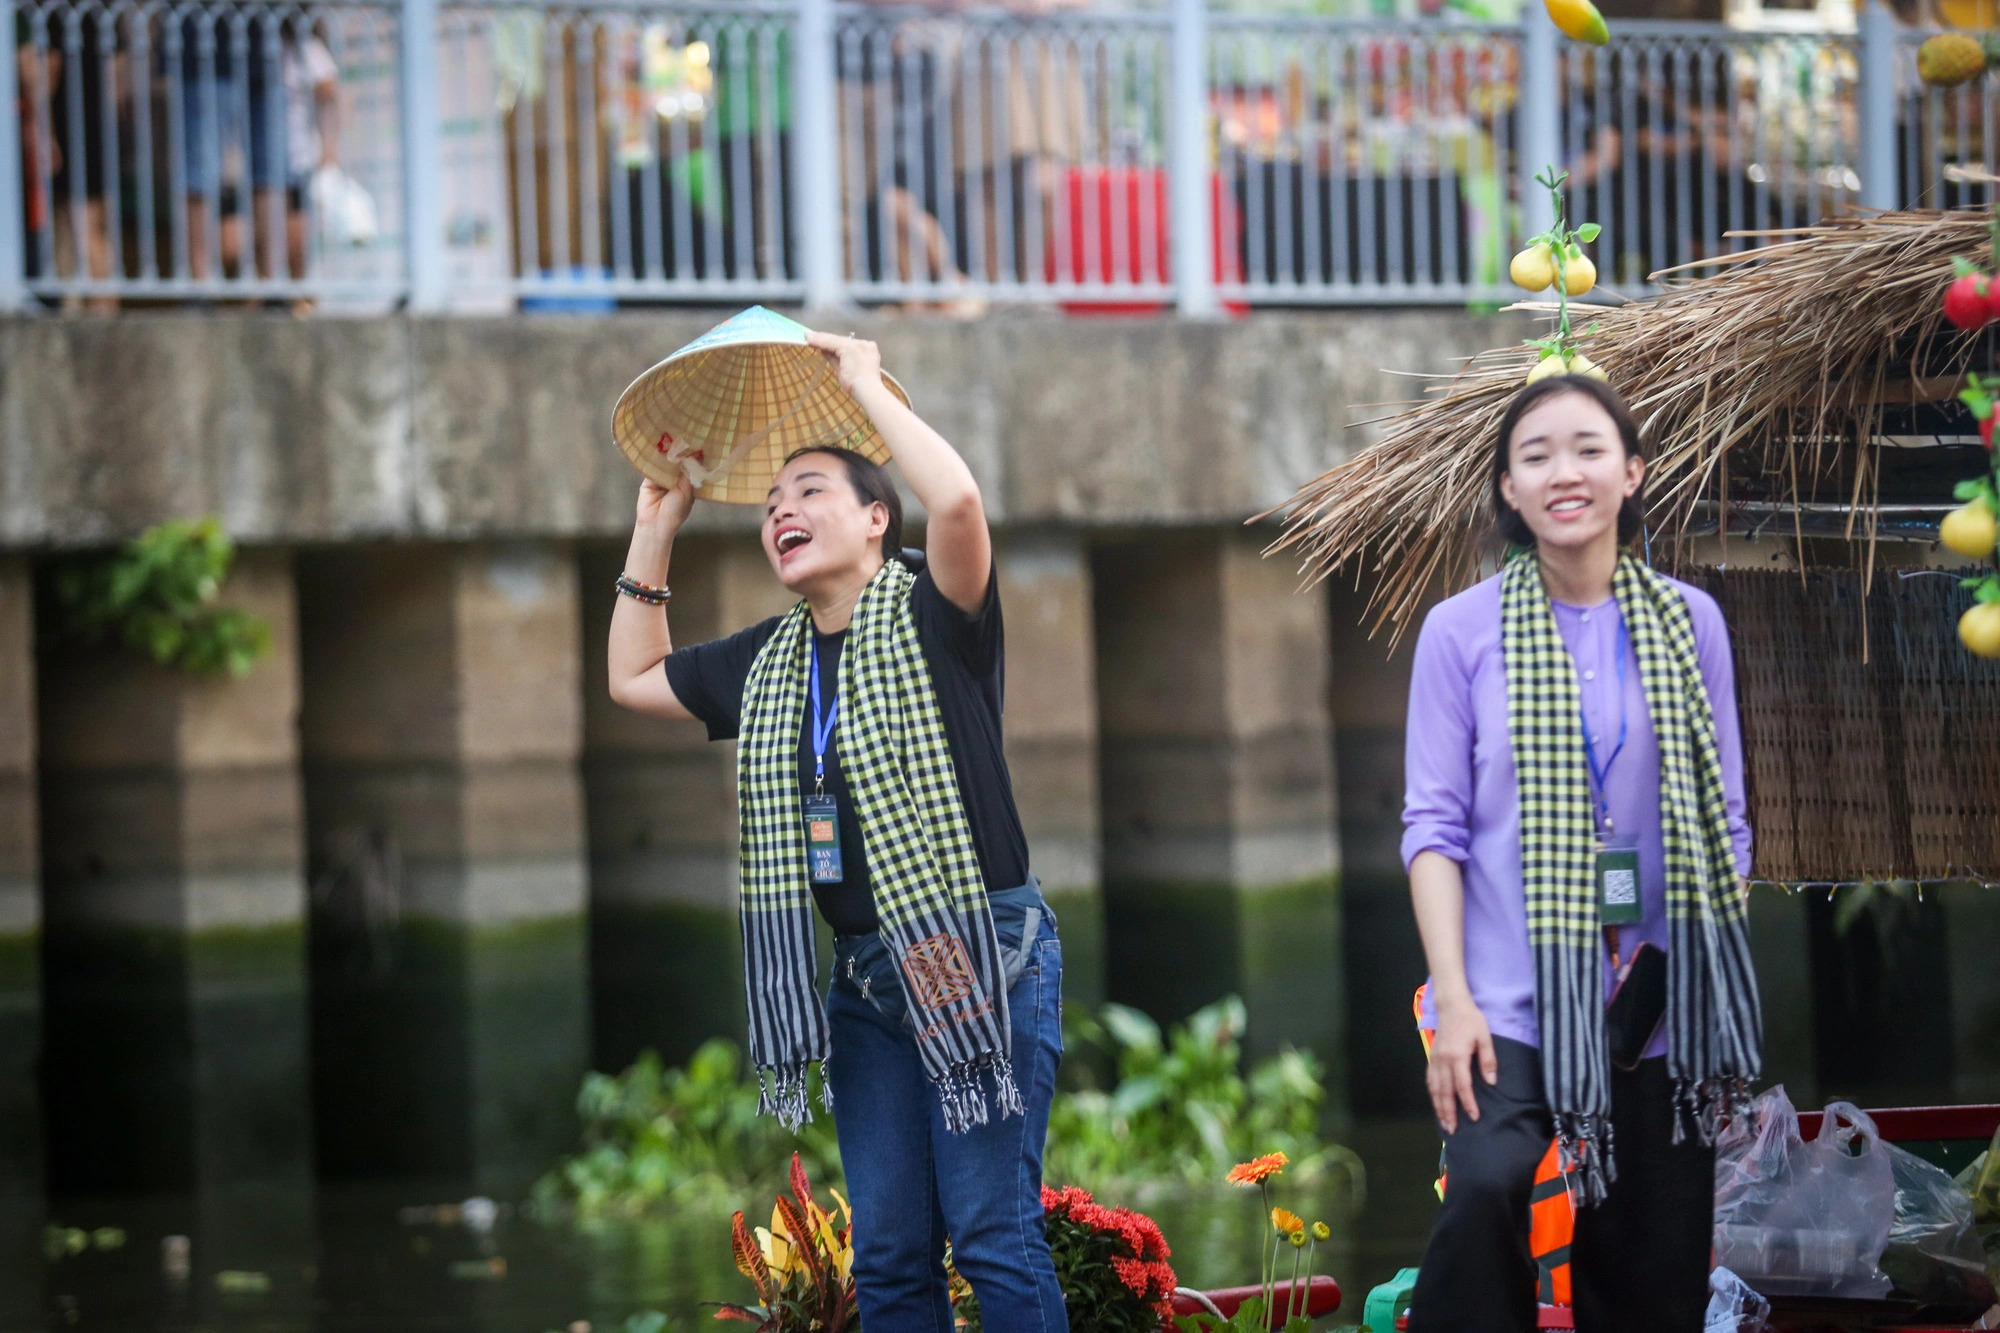 The organizer of the on-going Ho Chi Minh City River Festival set up a floating market  to serve visitors. Photo: Phuong Quyen / Tuoi Tre